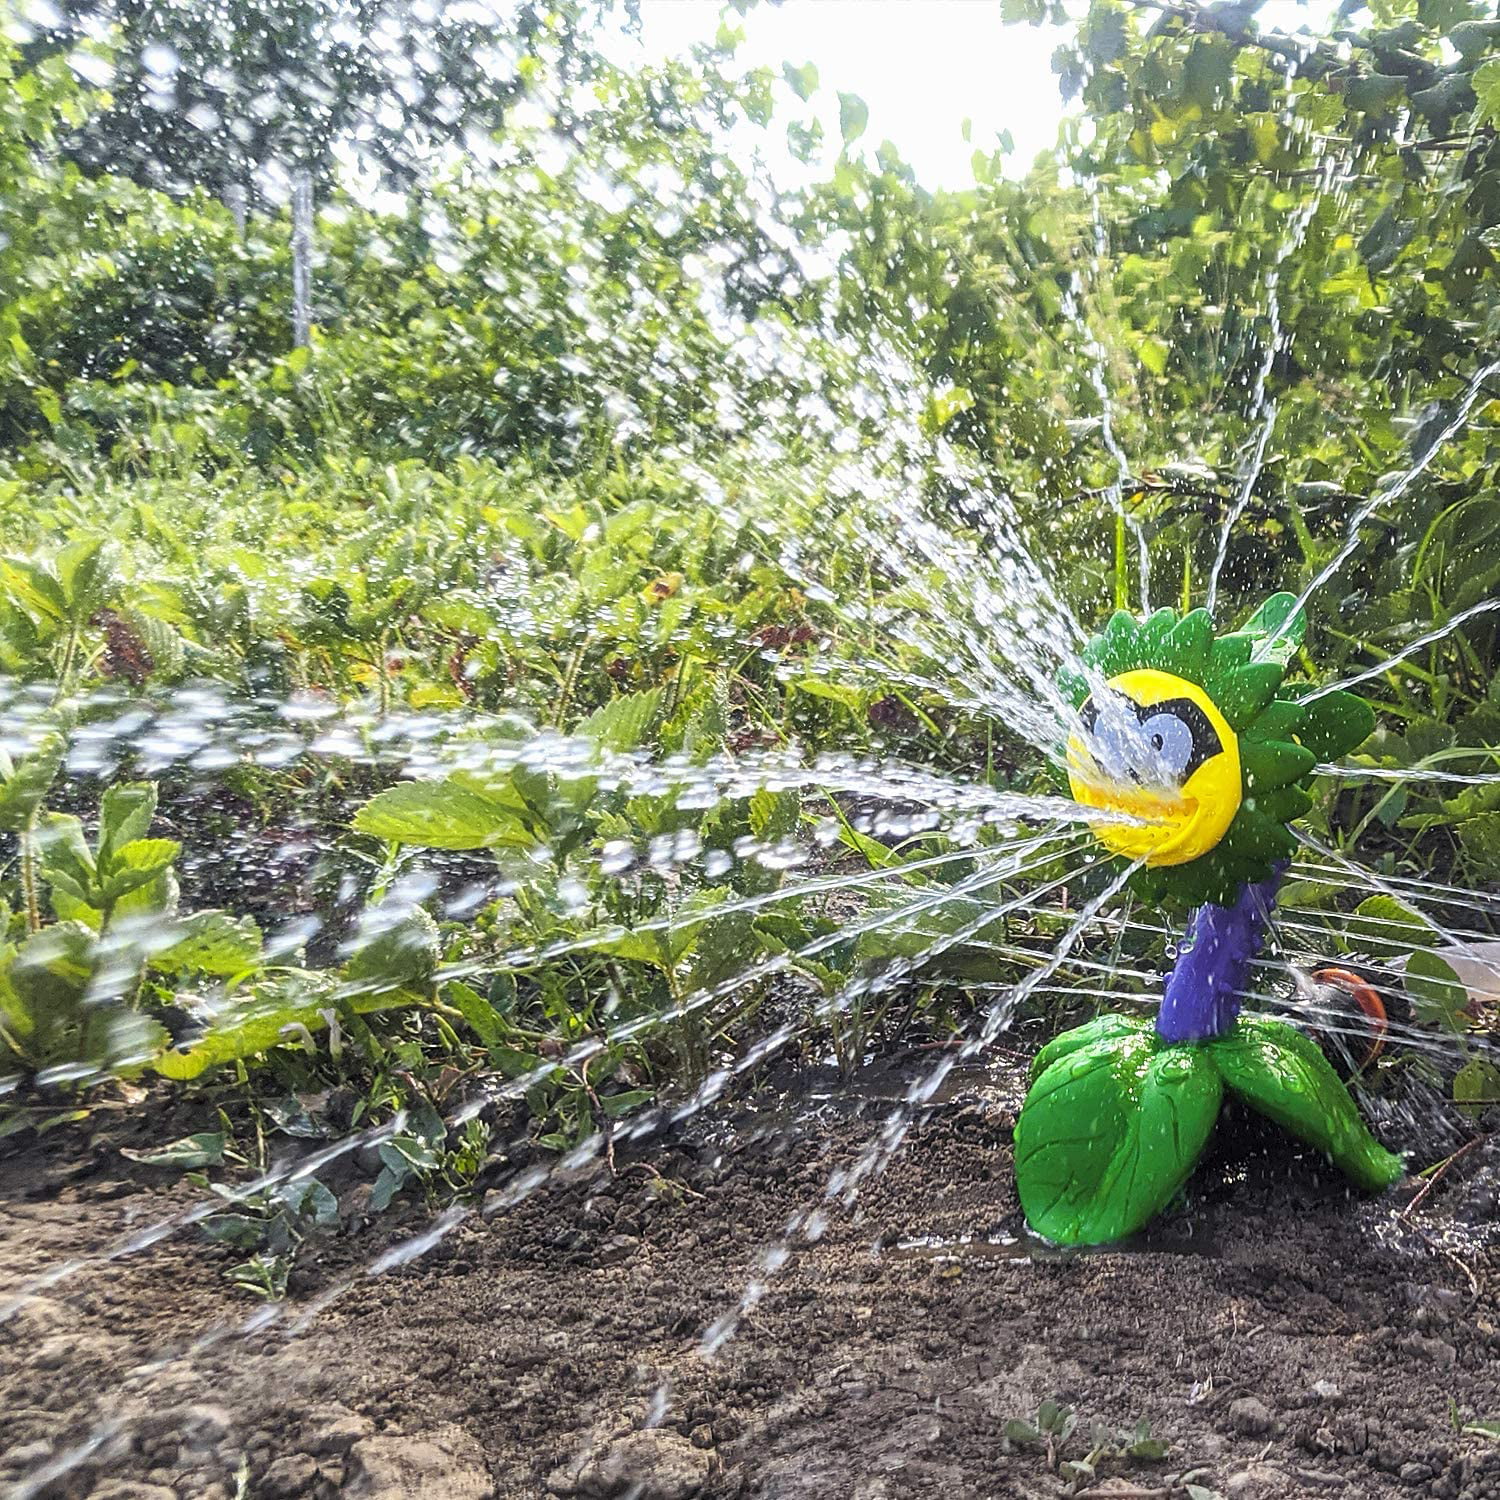 Sprinkler Toy for Babies and Toddlers Outdoor Water Toys Lifetime Replacement Guarantee Backyard Sunflower Sprinkler Toy with Wiggle Tubes Attaches to Garden Hose Kids Sprinklers for Yard Flower